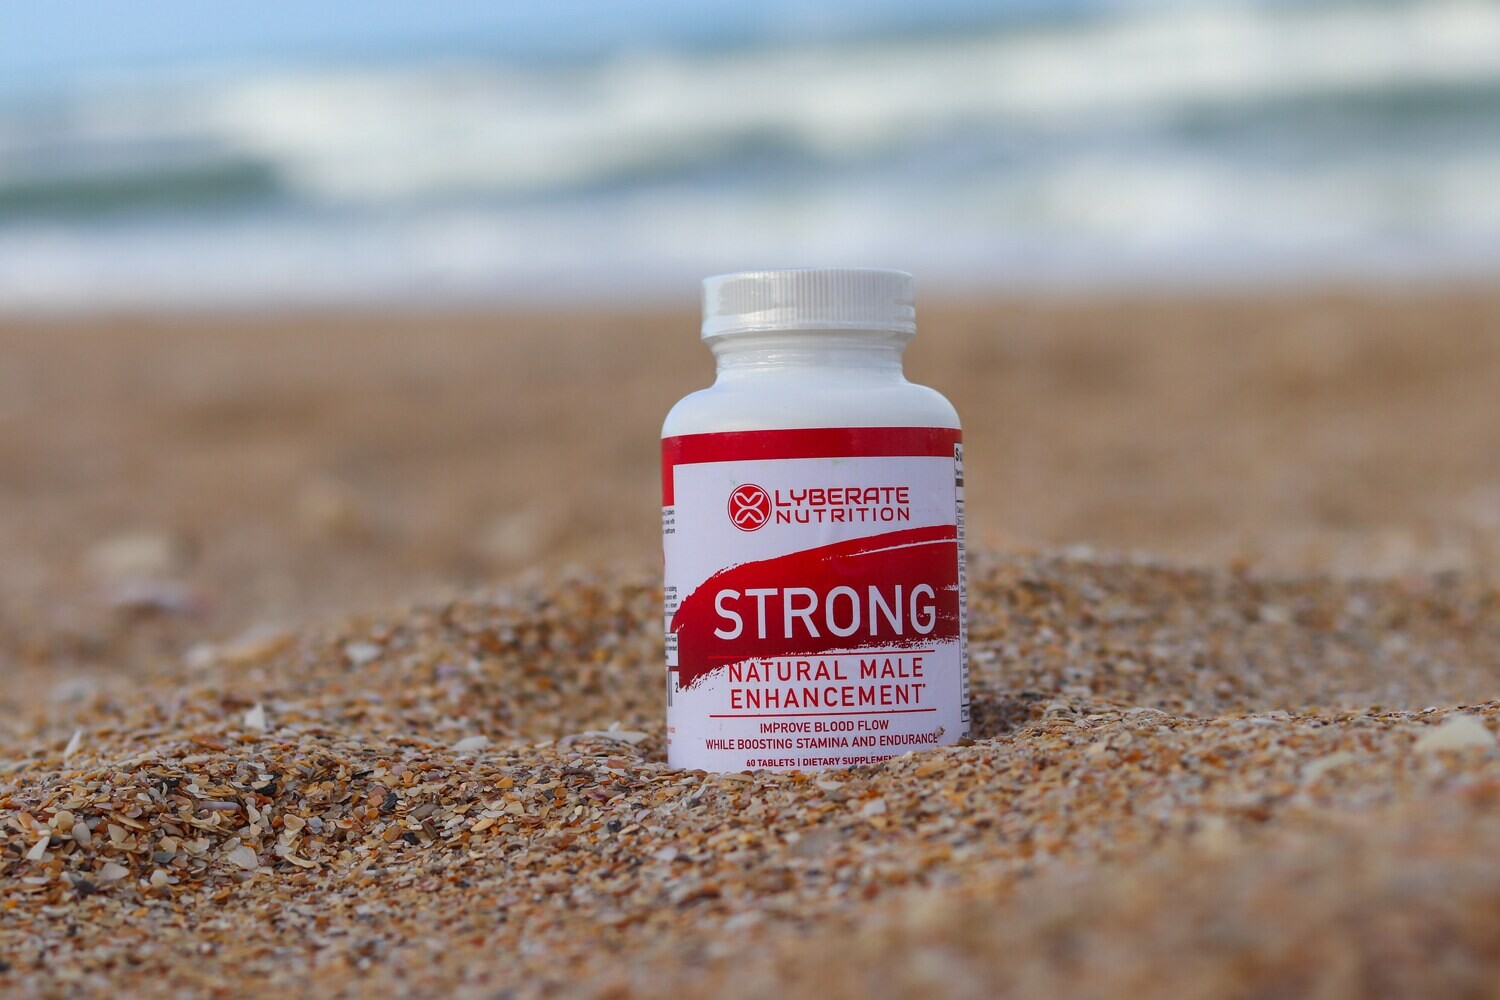 STRONG-Natural Male Enhancement